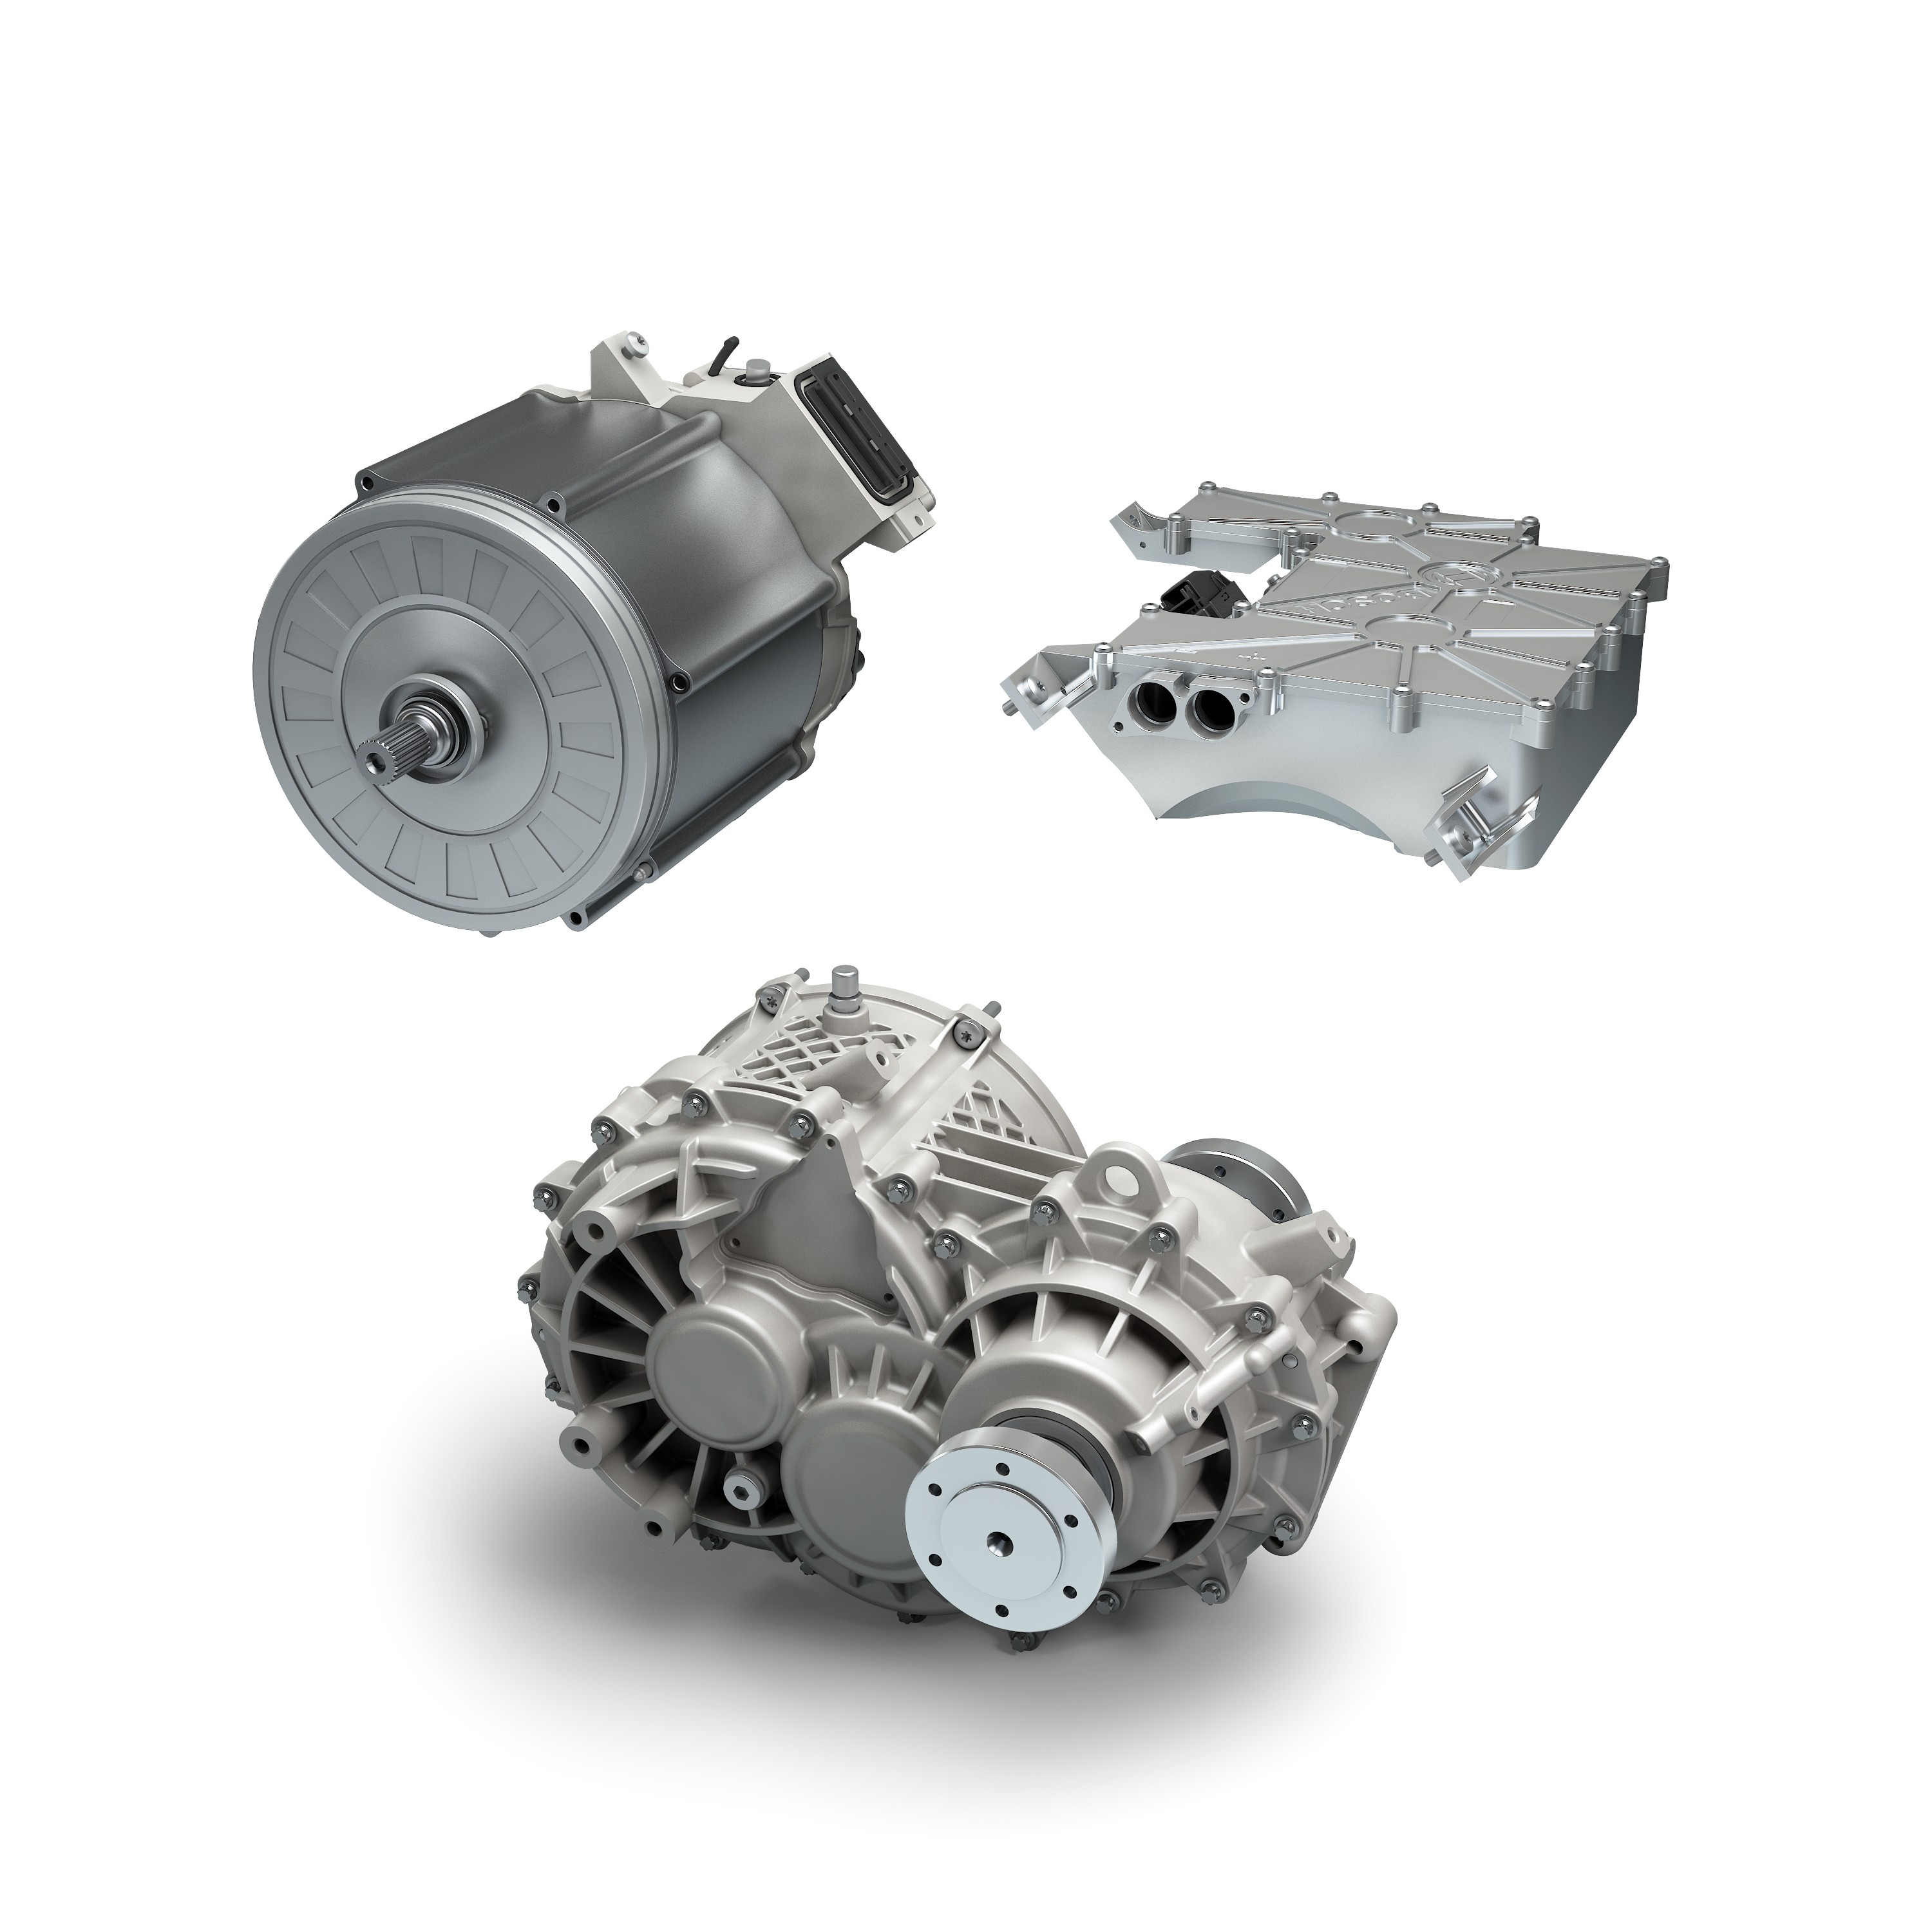 The Start Up Powertrain For Electric Cars The Bosch E Axle